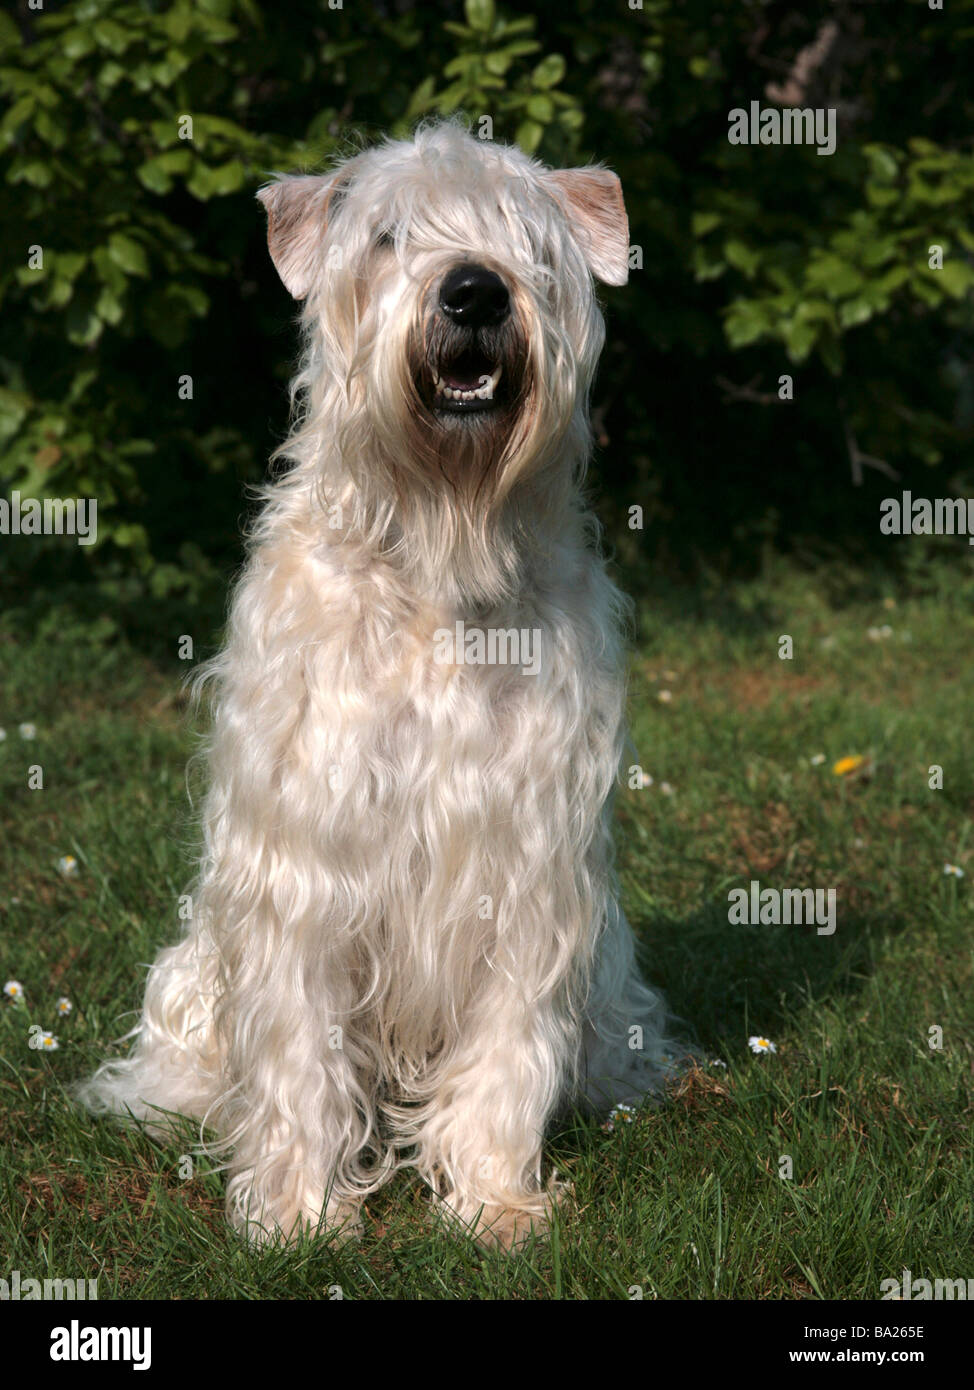 A soft coated wheaten terrier Stock Photo